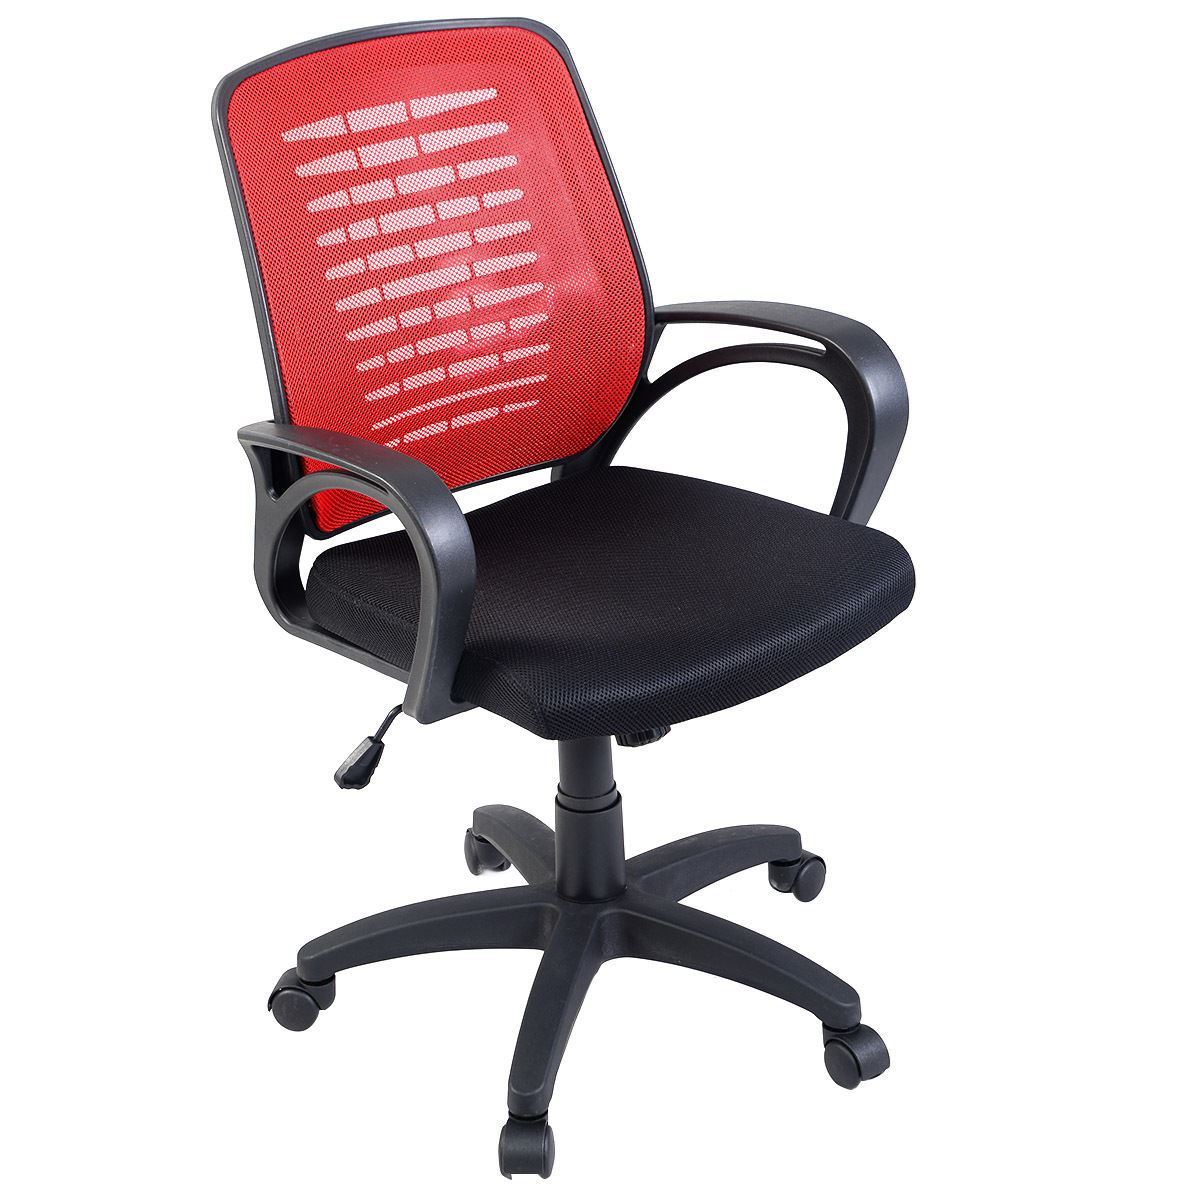 Online Gym Shop Cb17041 40.1 X 22.6 X 22 In. Executive Modern Computer Office Chair Ergonomic, Mid-back